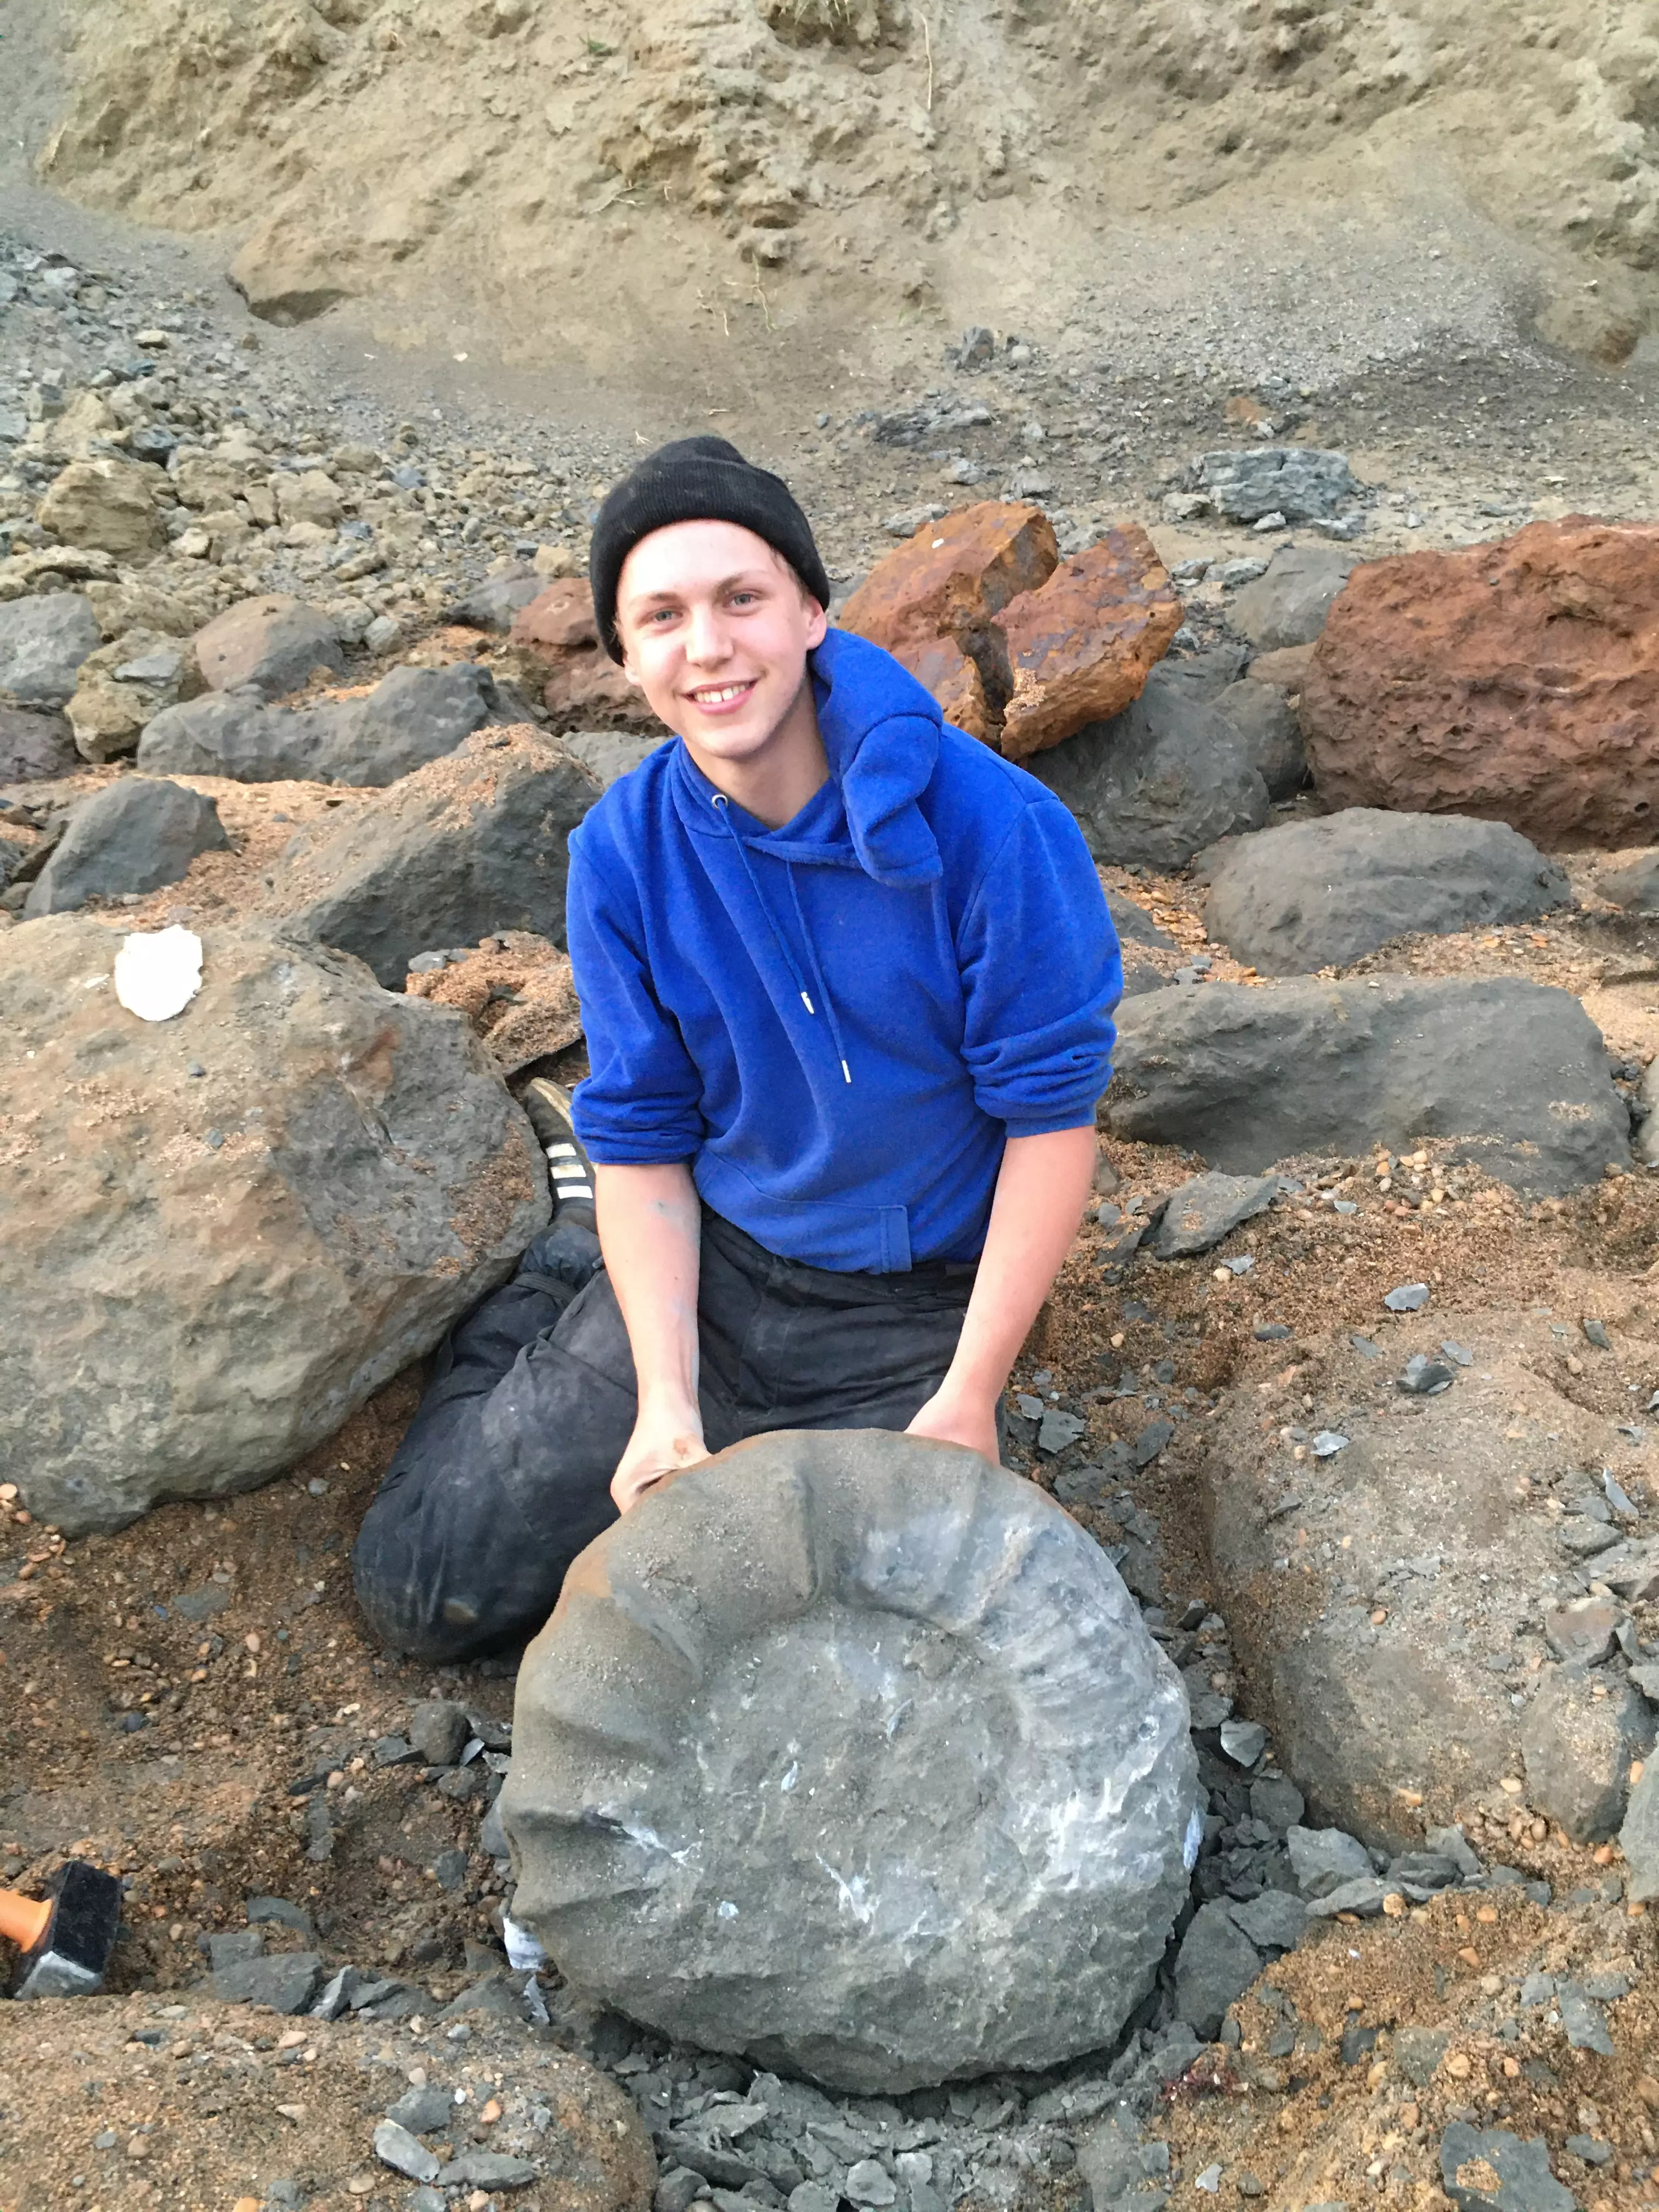 You've both got to have a picture when you find an ammonite this big. That's the rule.